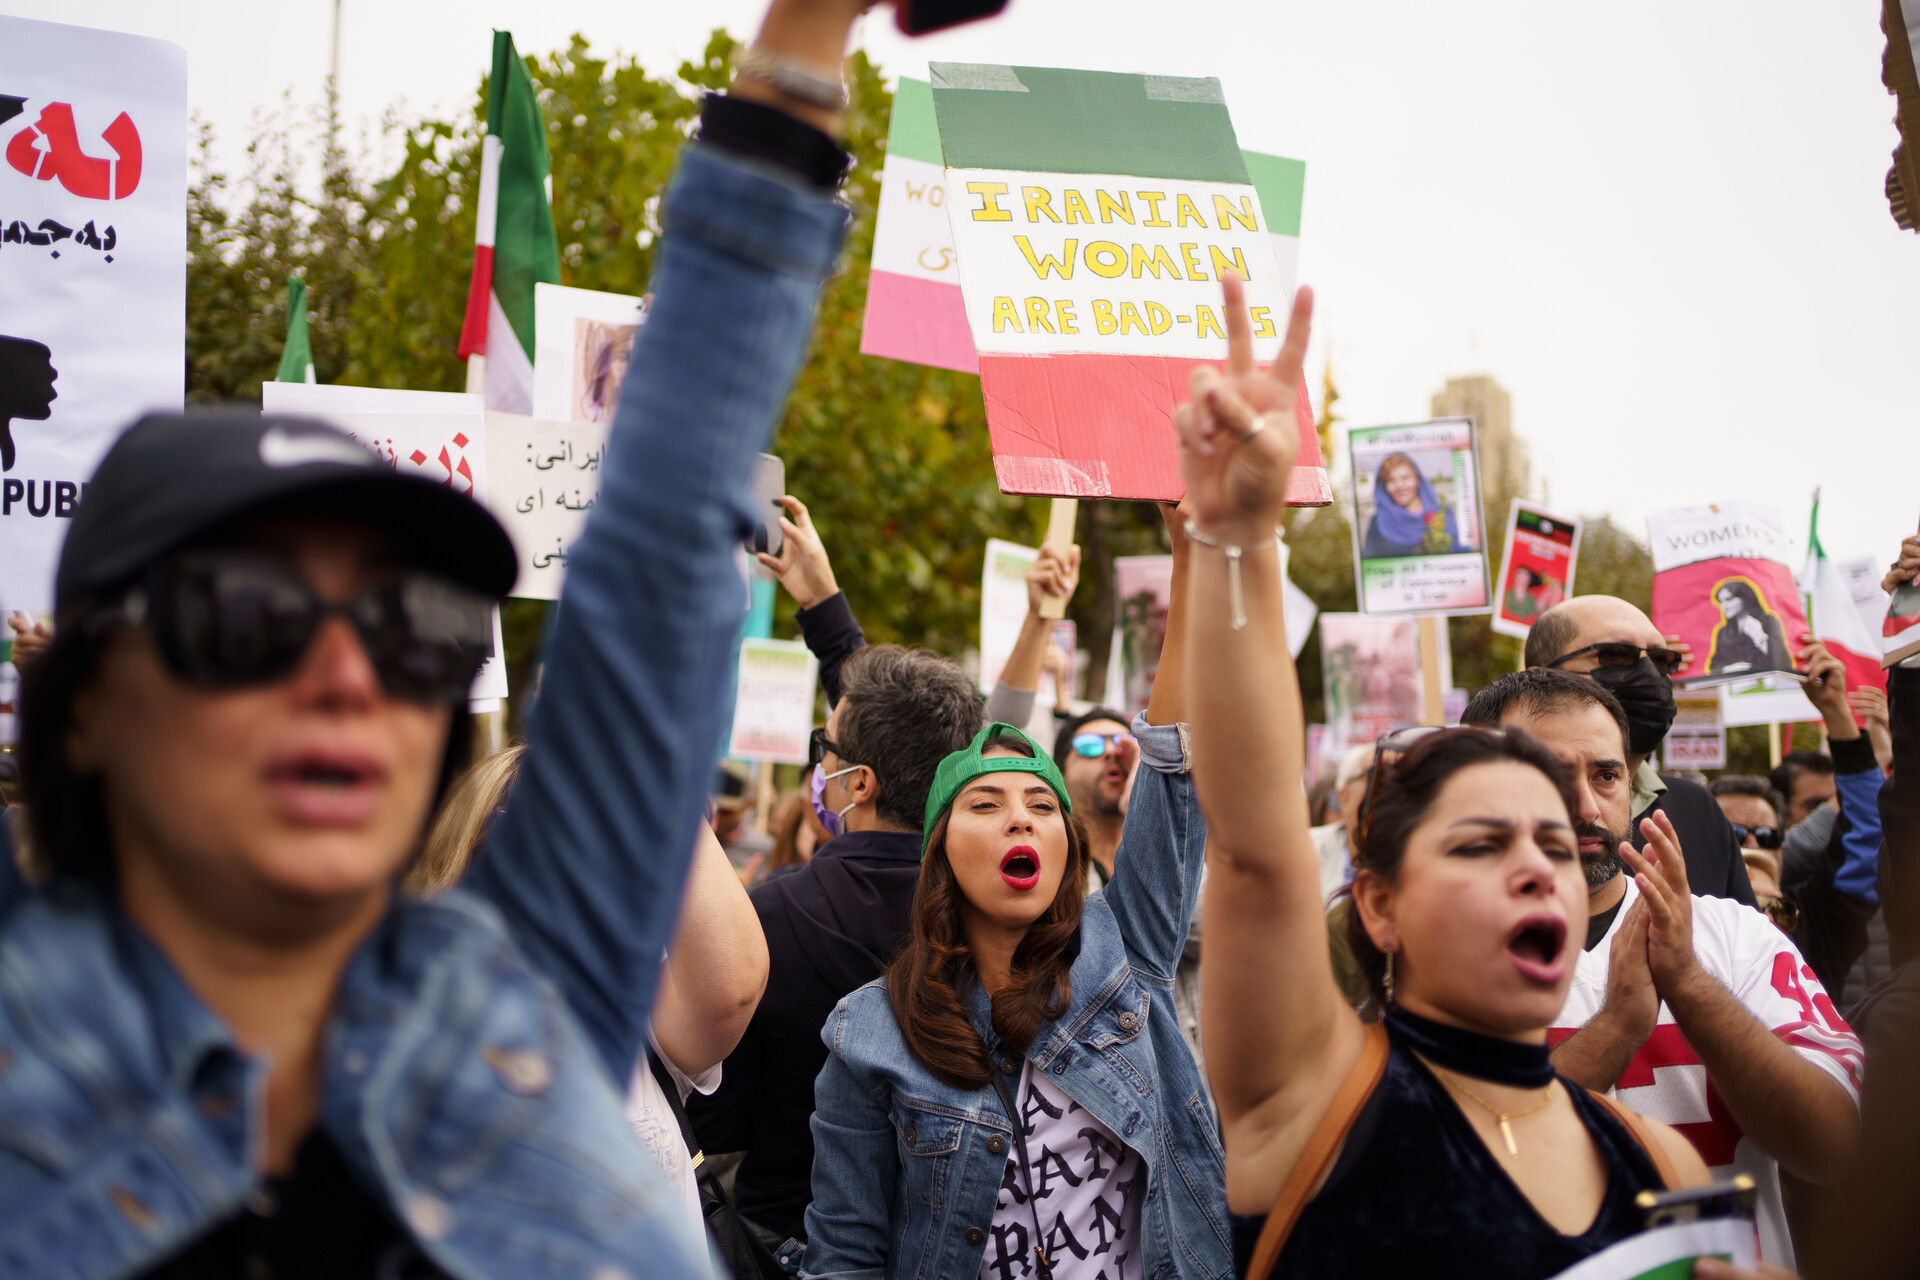 Several women in a crowd raising their hands and holding signs and flags in a large crowd outside.